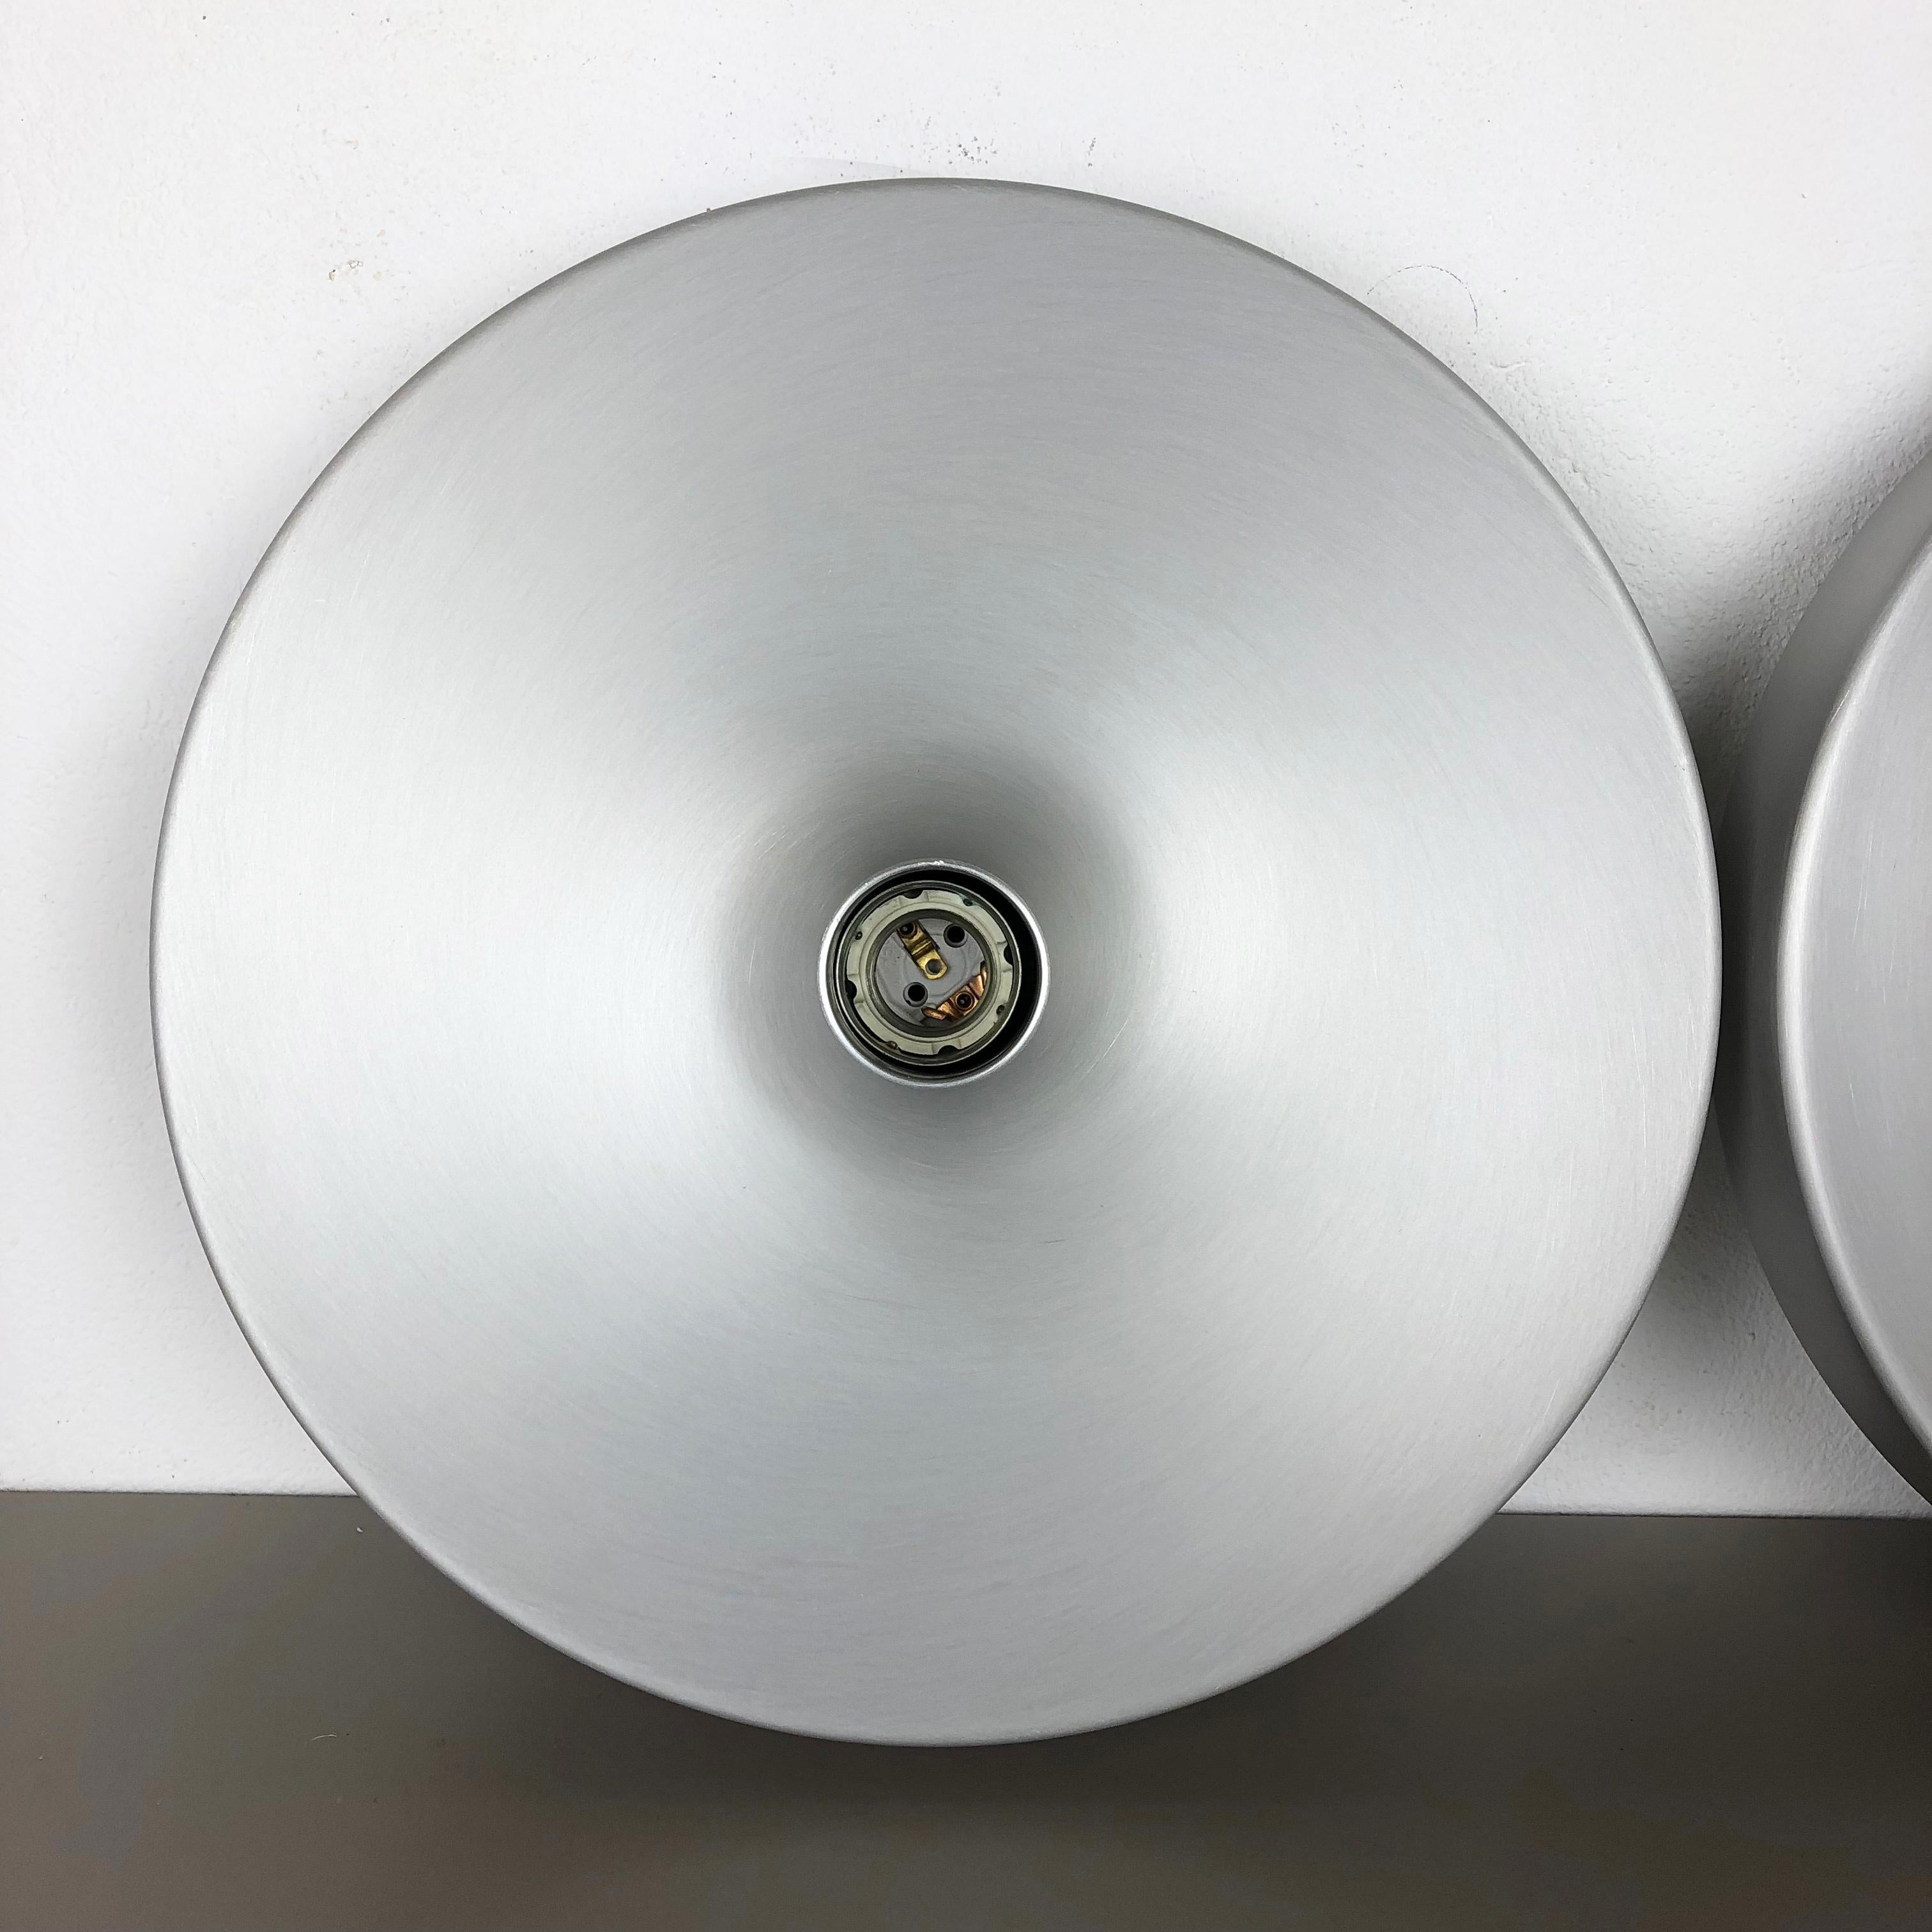 Article:


New old stock!

Wall light sconce set of 2


Producer:

Staff lights



Origin:

Germany



Age:

1970s



Description:

Original 1970s modernist German wall light made of solid metal. This super rare wall